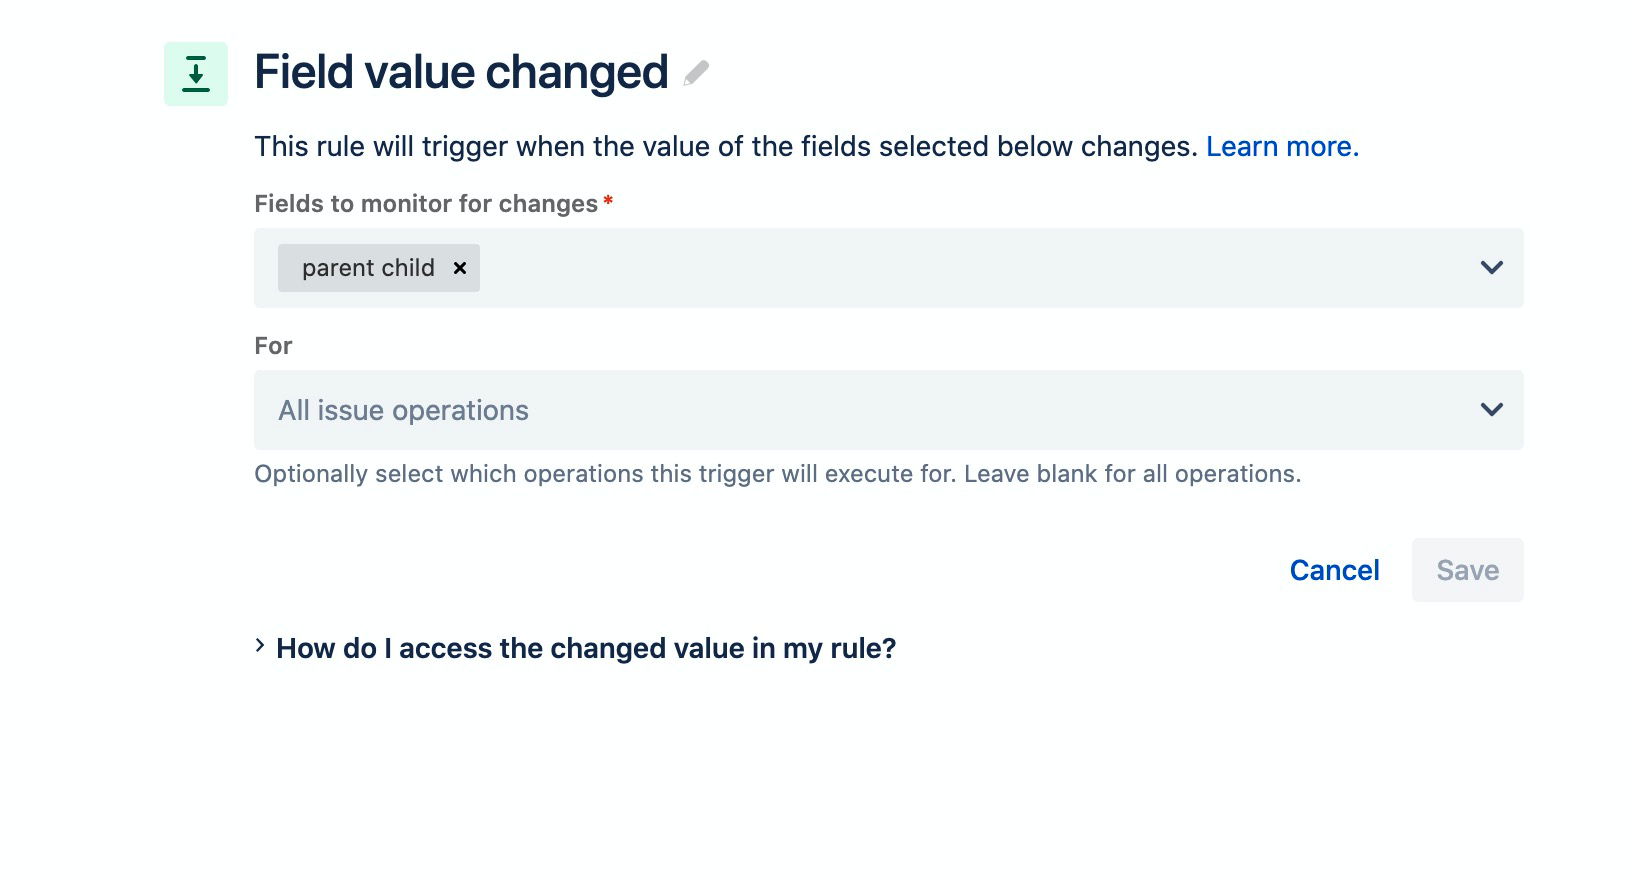 Field value changed